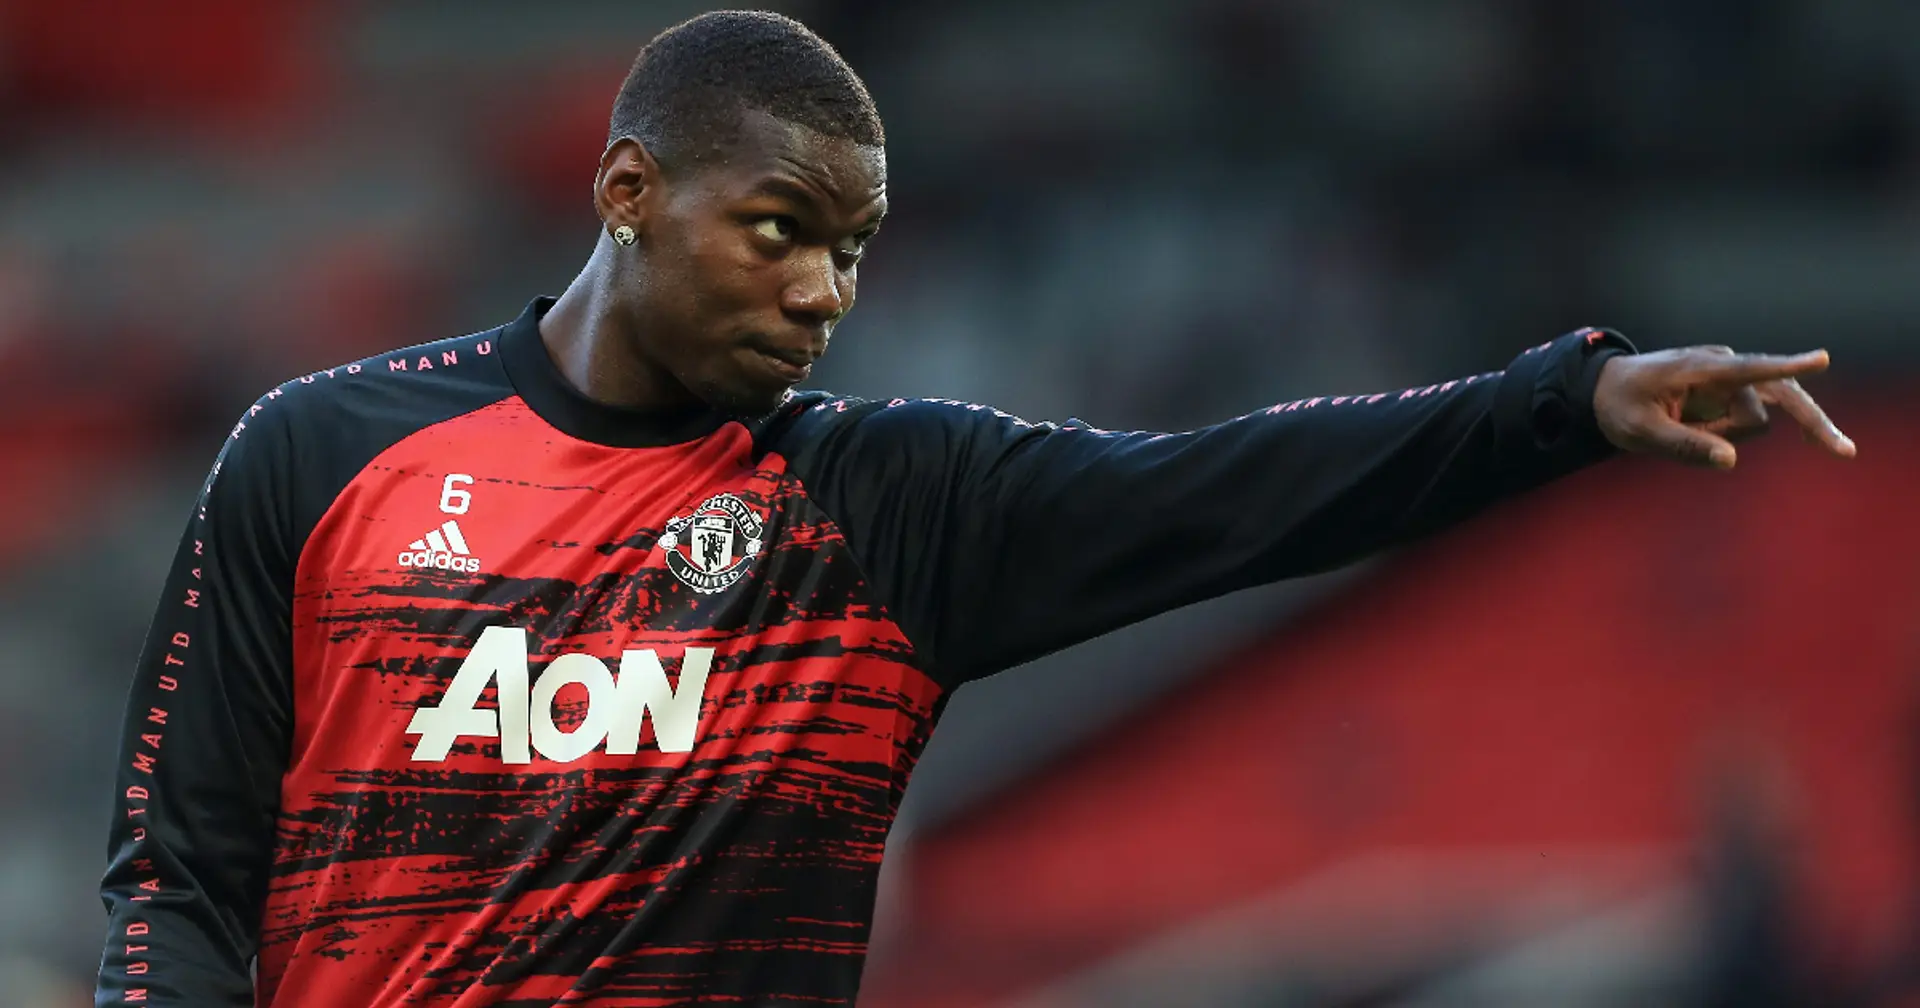 Paul Pogba's incredible response to racist fan shows why he's a class act